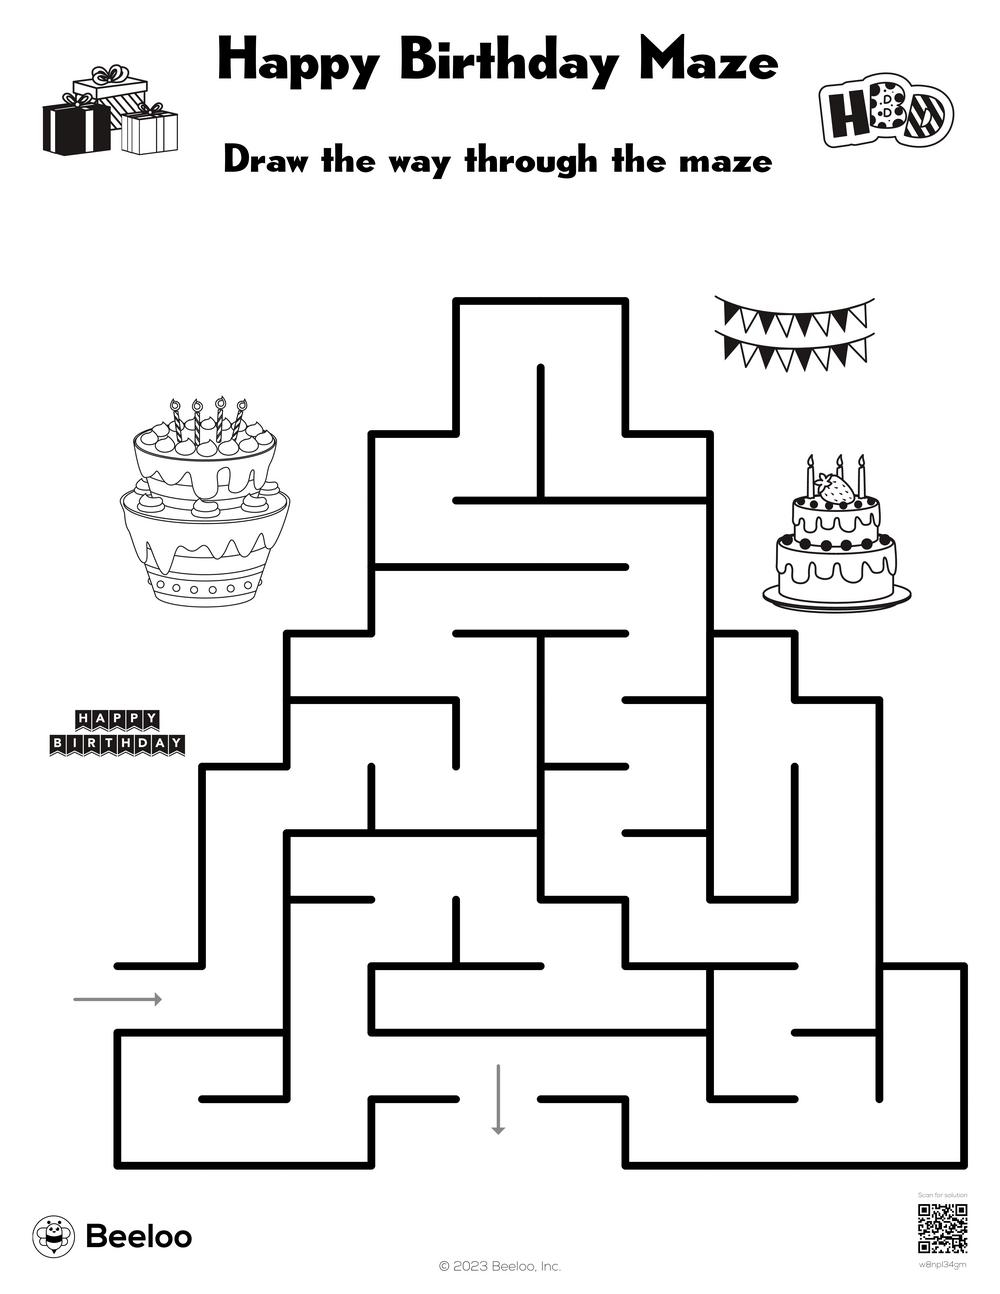 Happy Birthday Maze Beeloo Printable Crafts And Activities For Kids